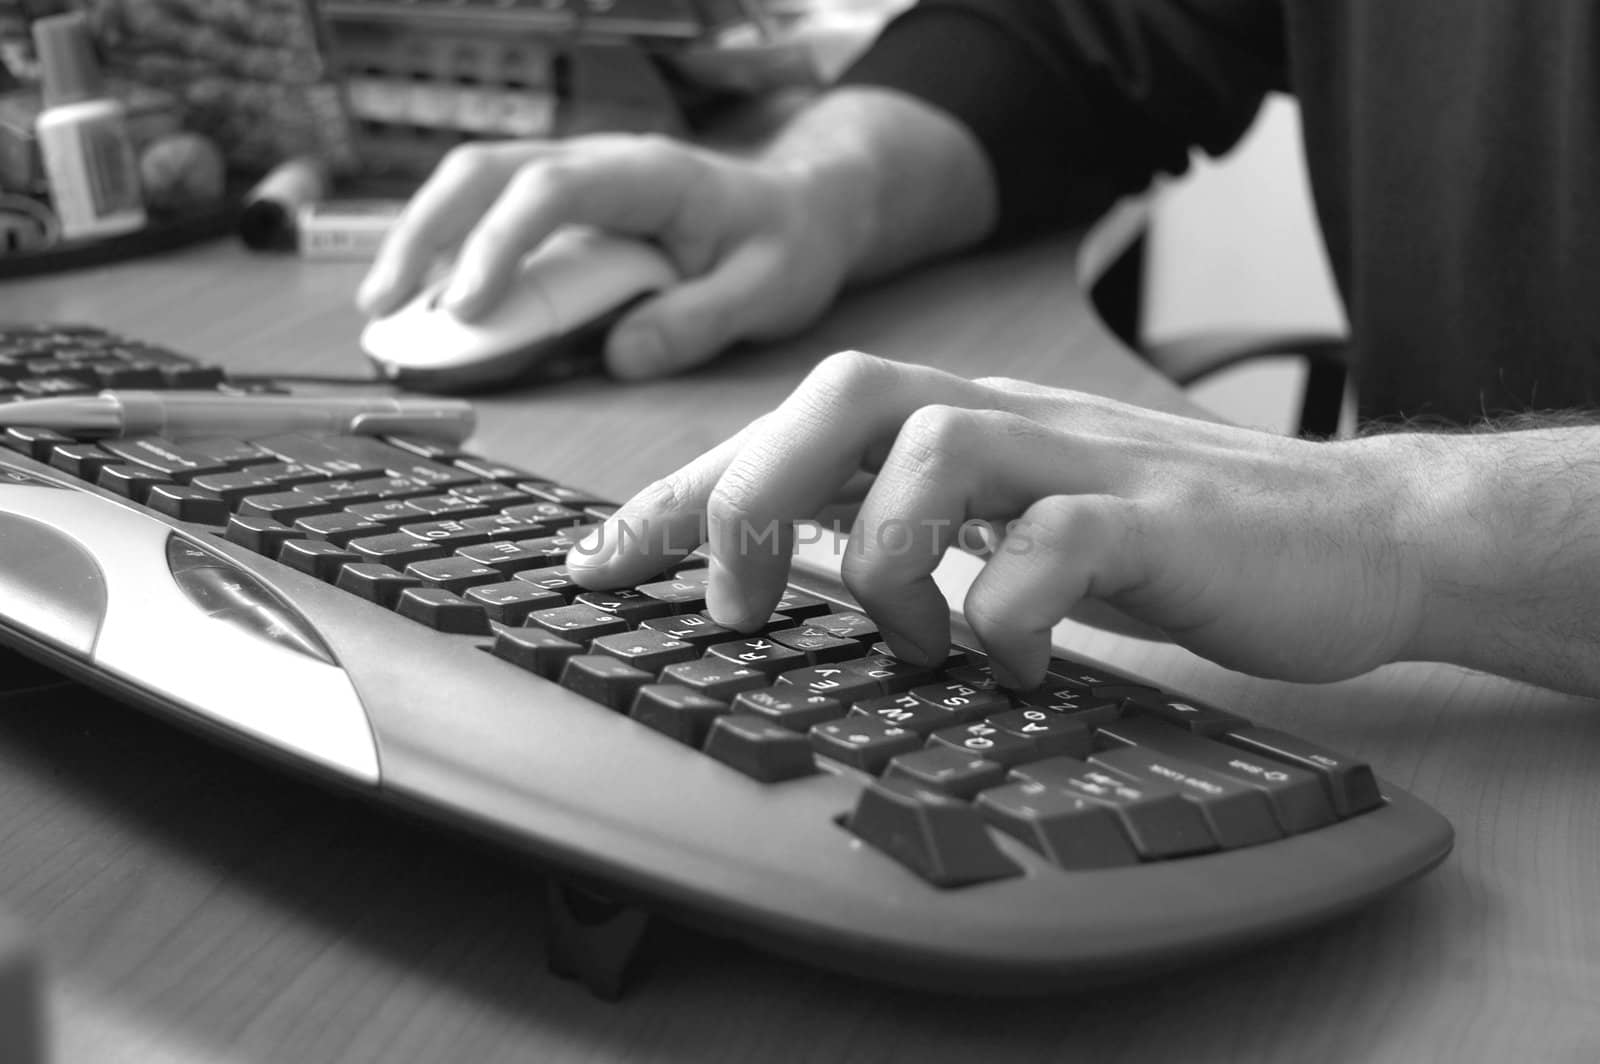 male hand typing on black keyboard, black and white image